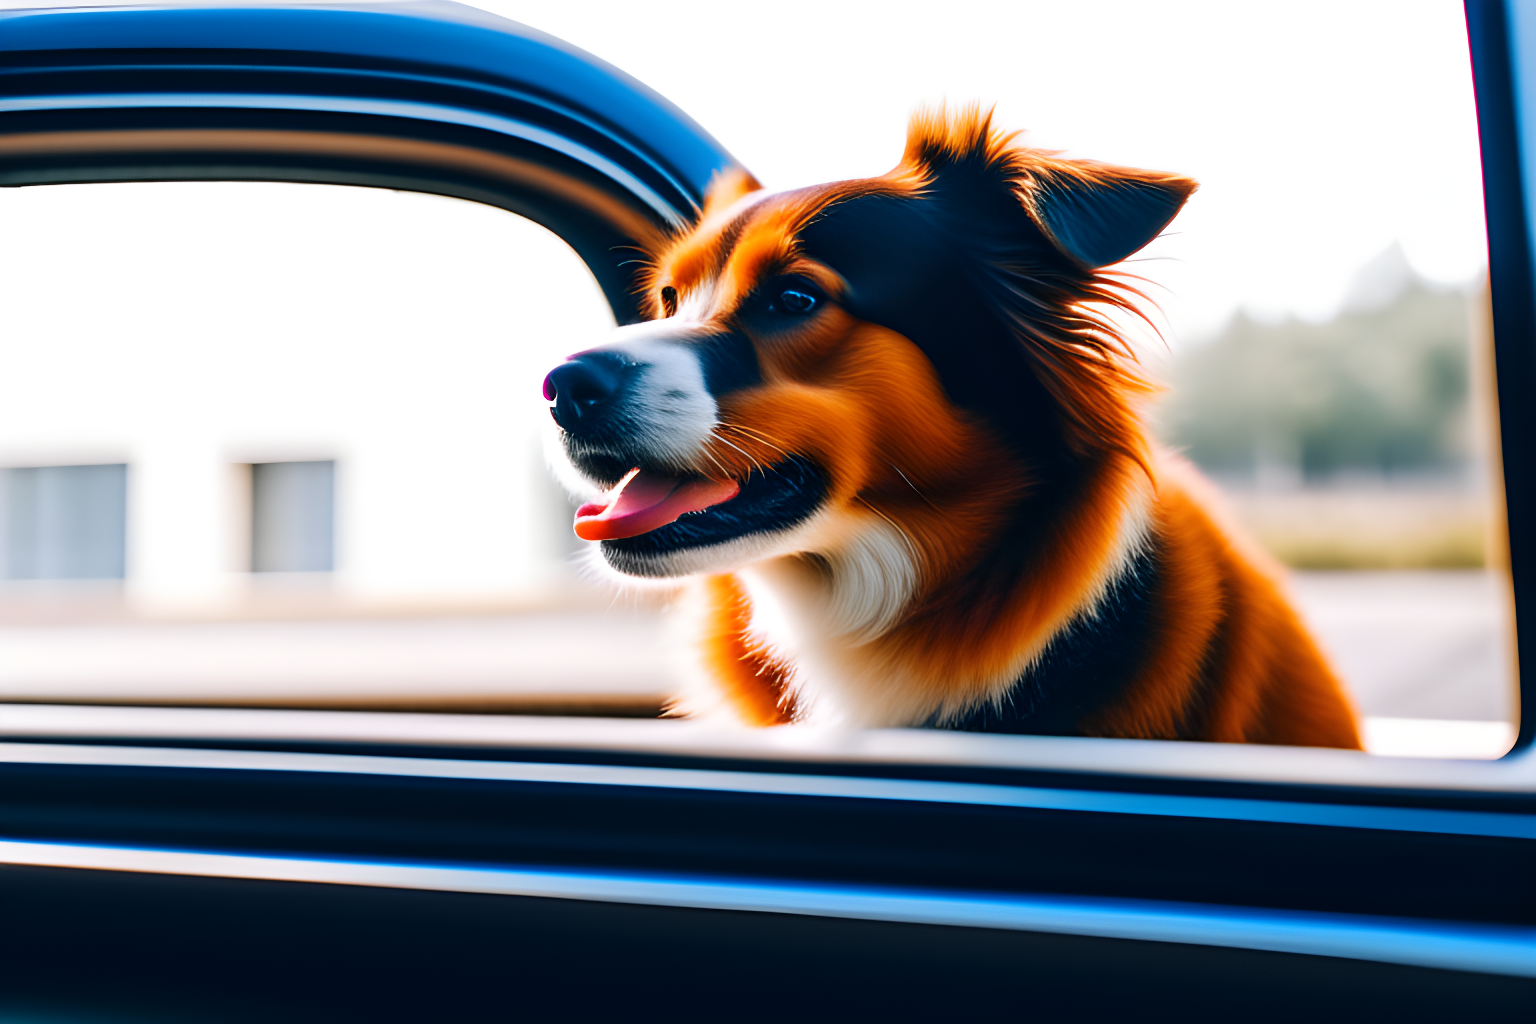 a dog hopping out a car window